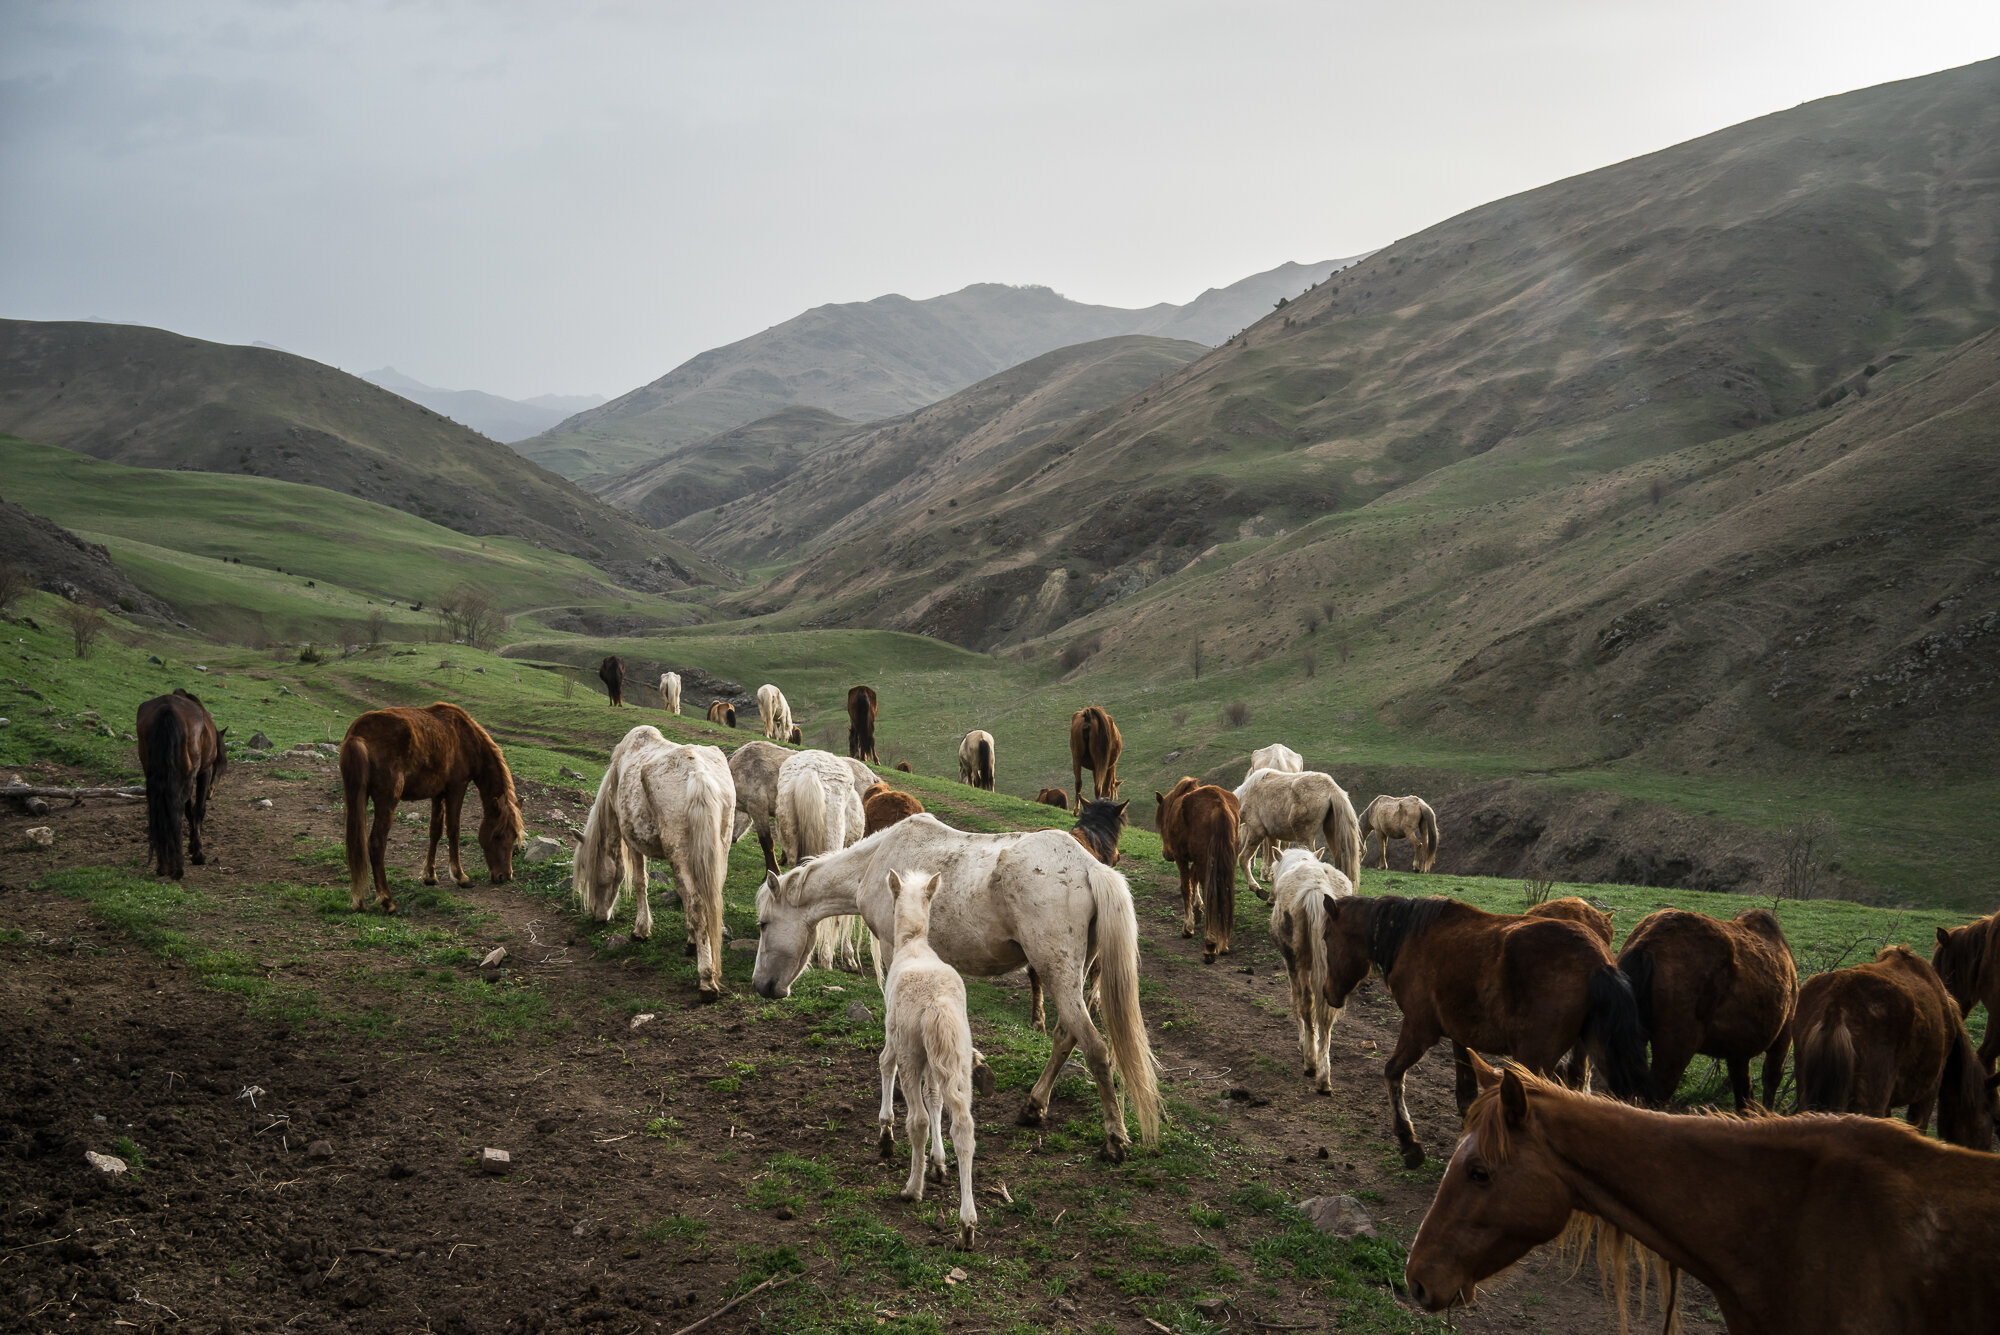  A herd of horses, the brown ones of which are Karabakh horses, a breed originally developed in the region which is now faced with extinction, are let out to pasture on a farm in the mountains. Vank, Nagorno-Karabakh. 2015. 